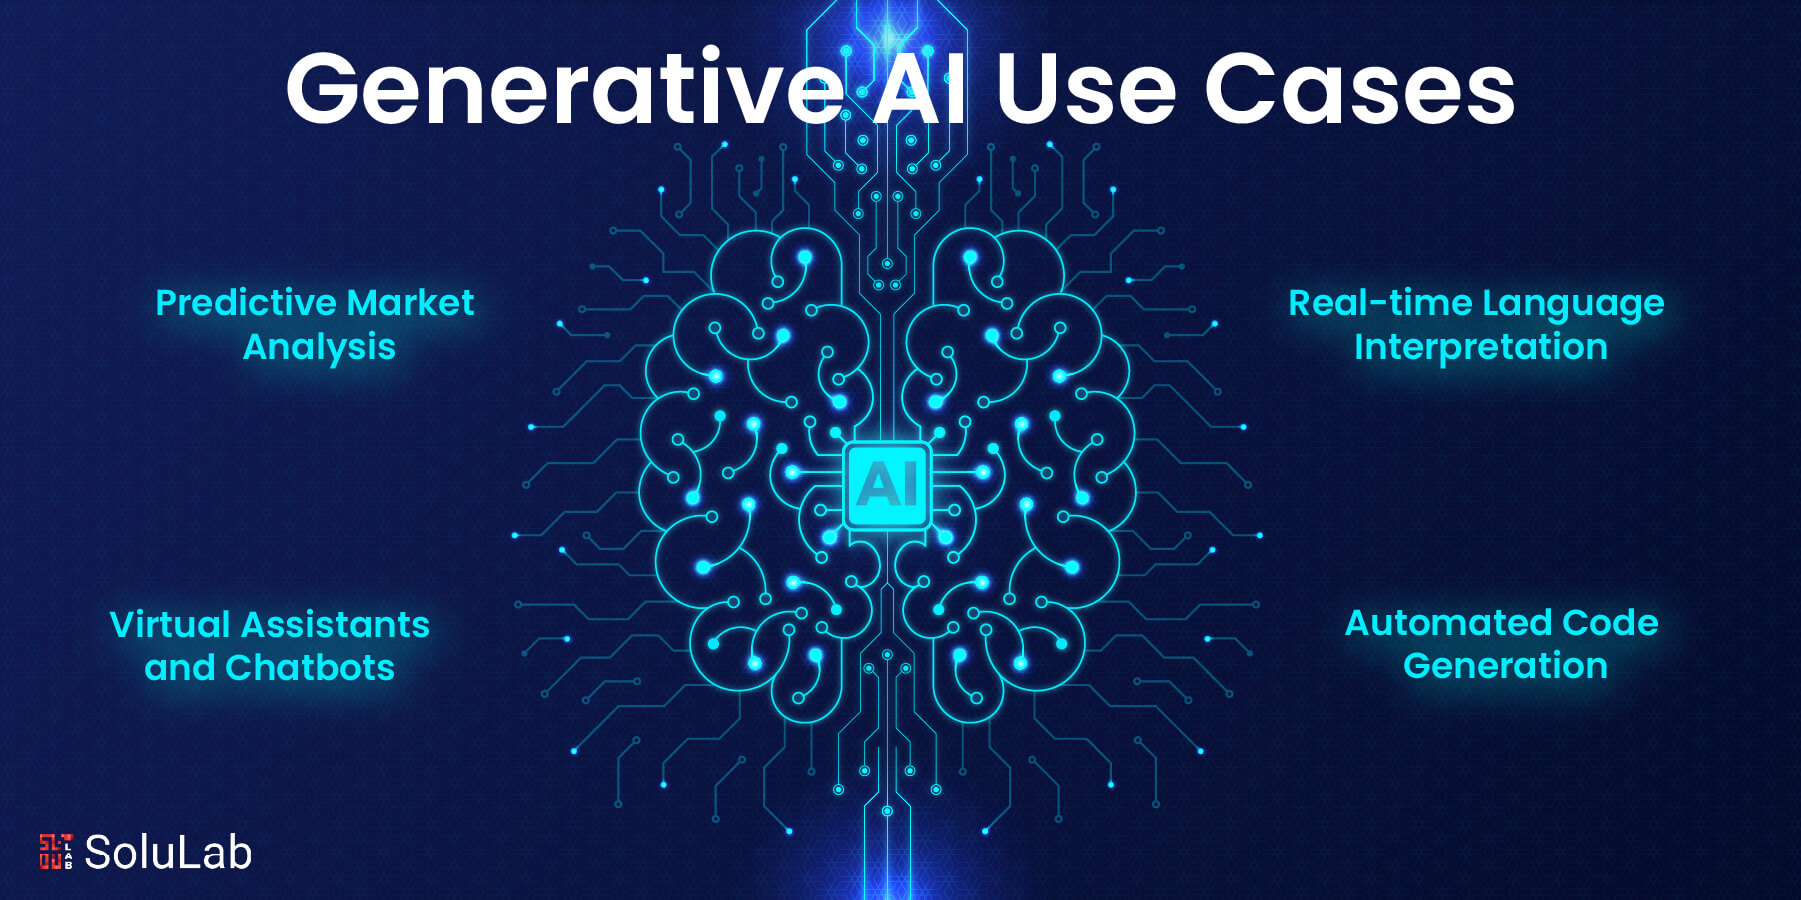 Generative AI Use Cases and Applications